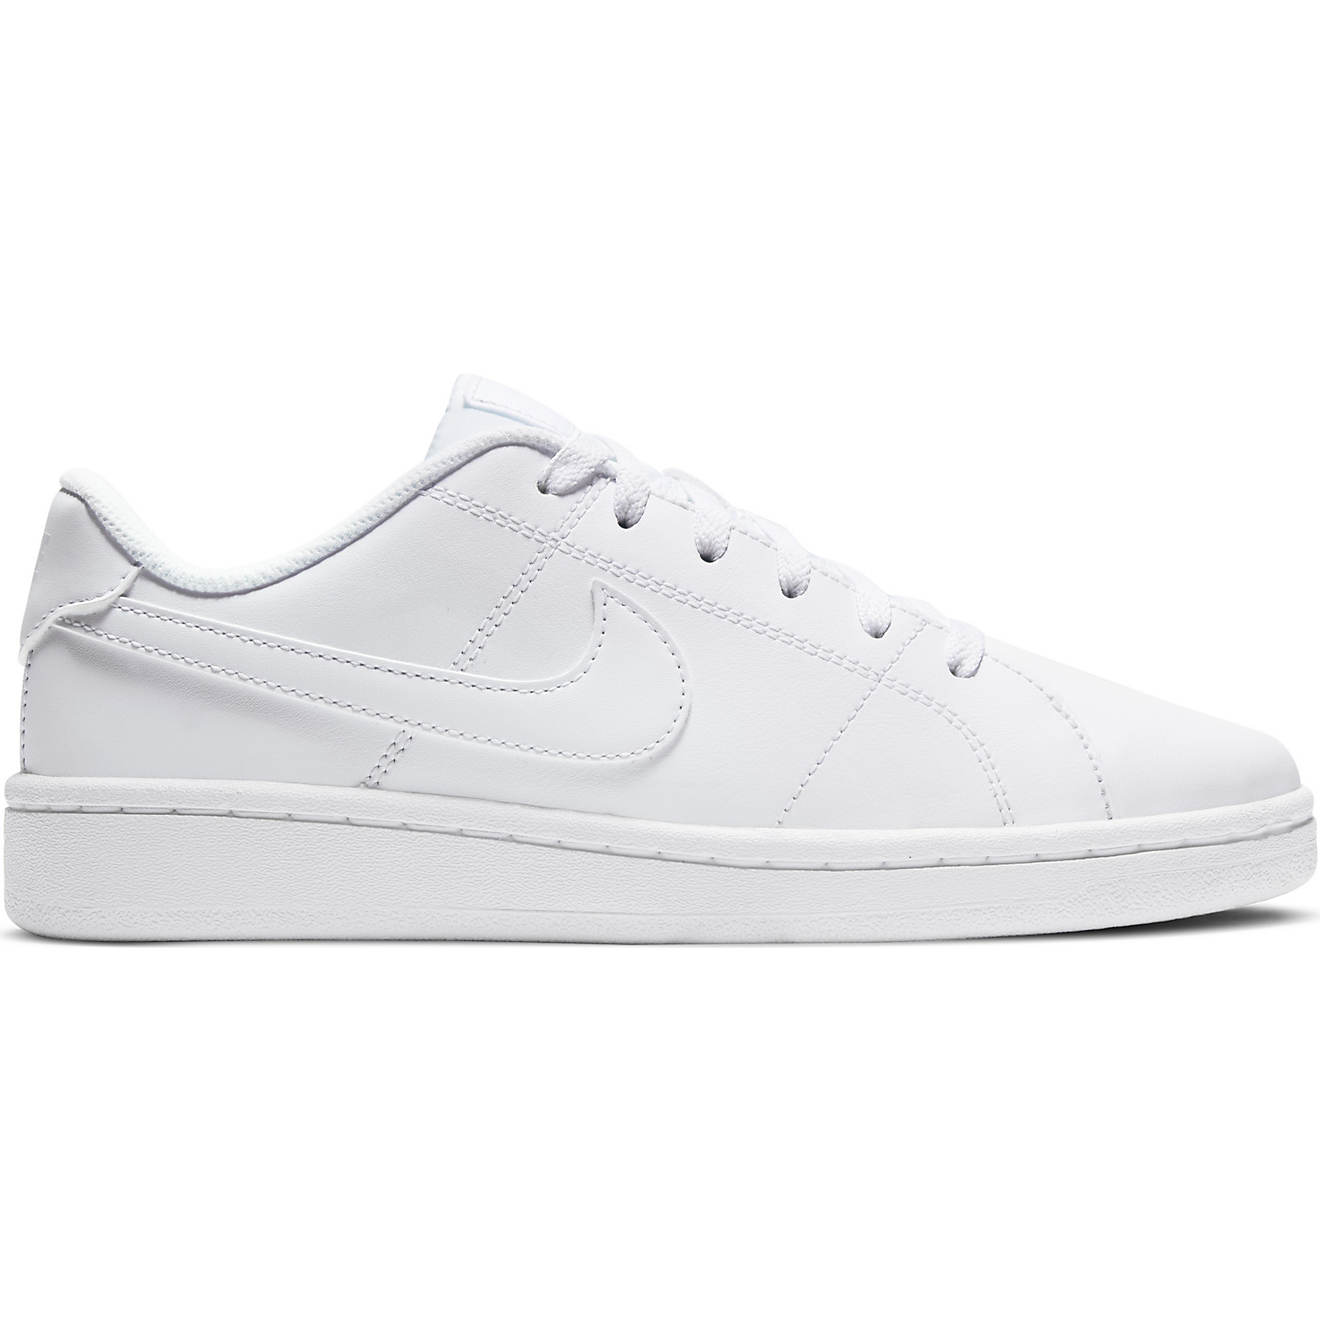 Nike Women’s Court Royale 2 Shoes | Academy